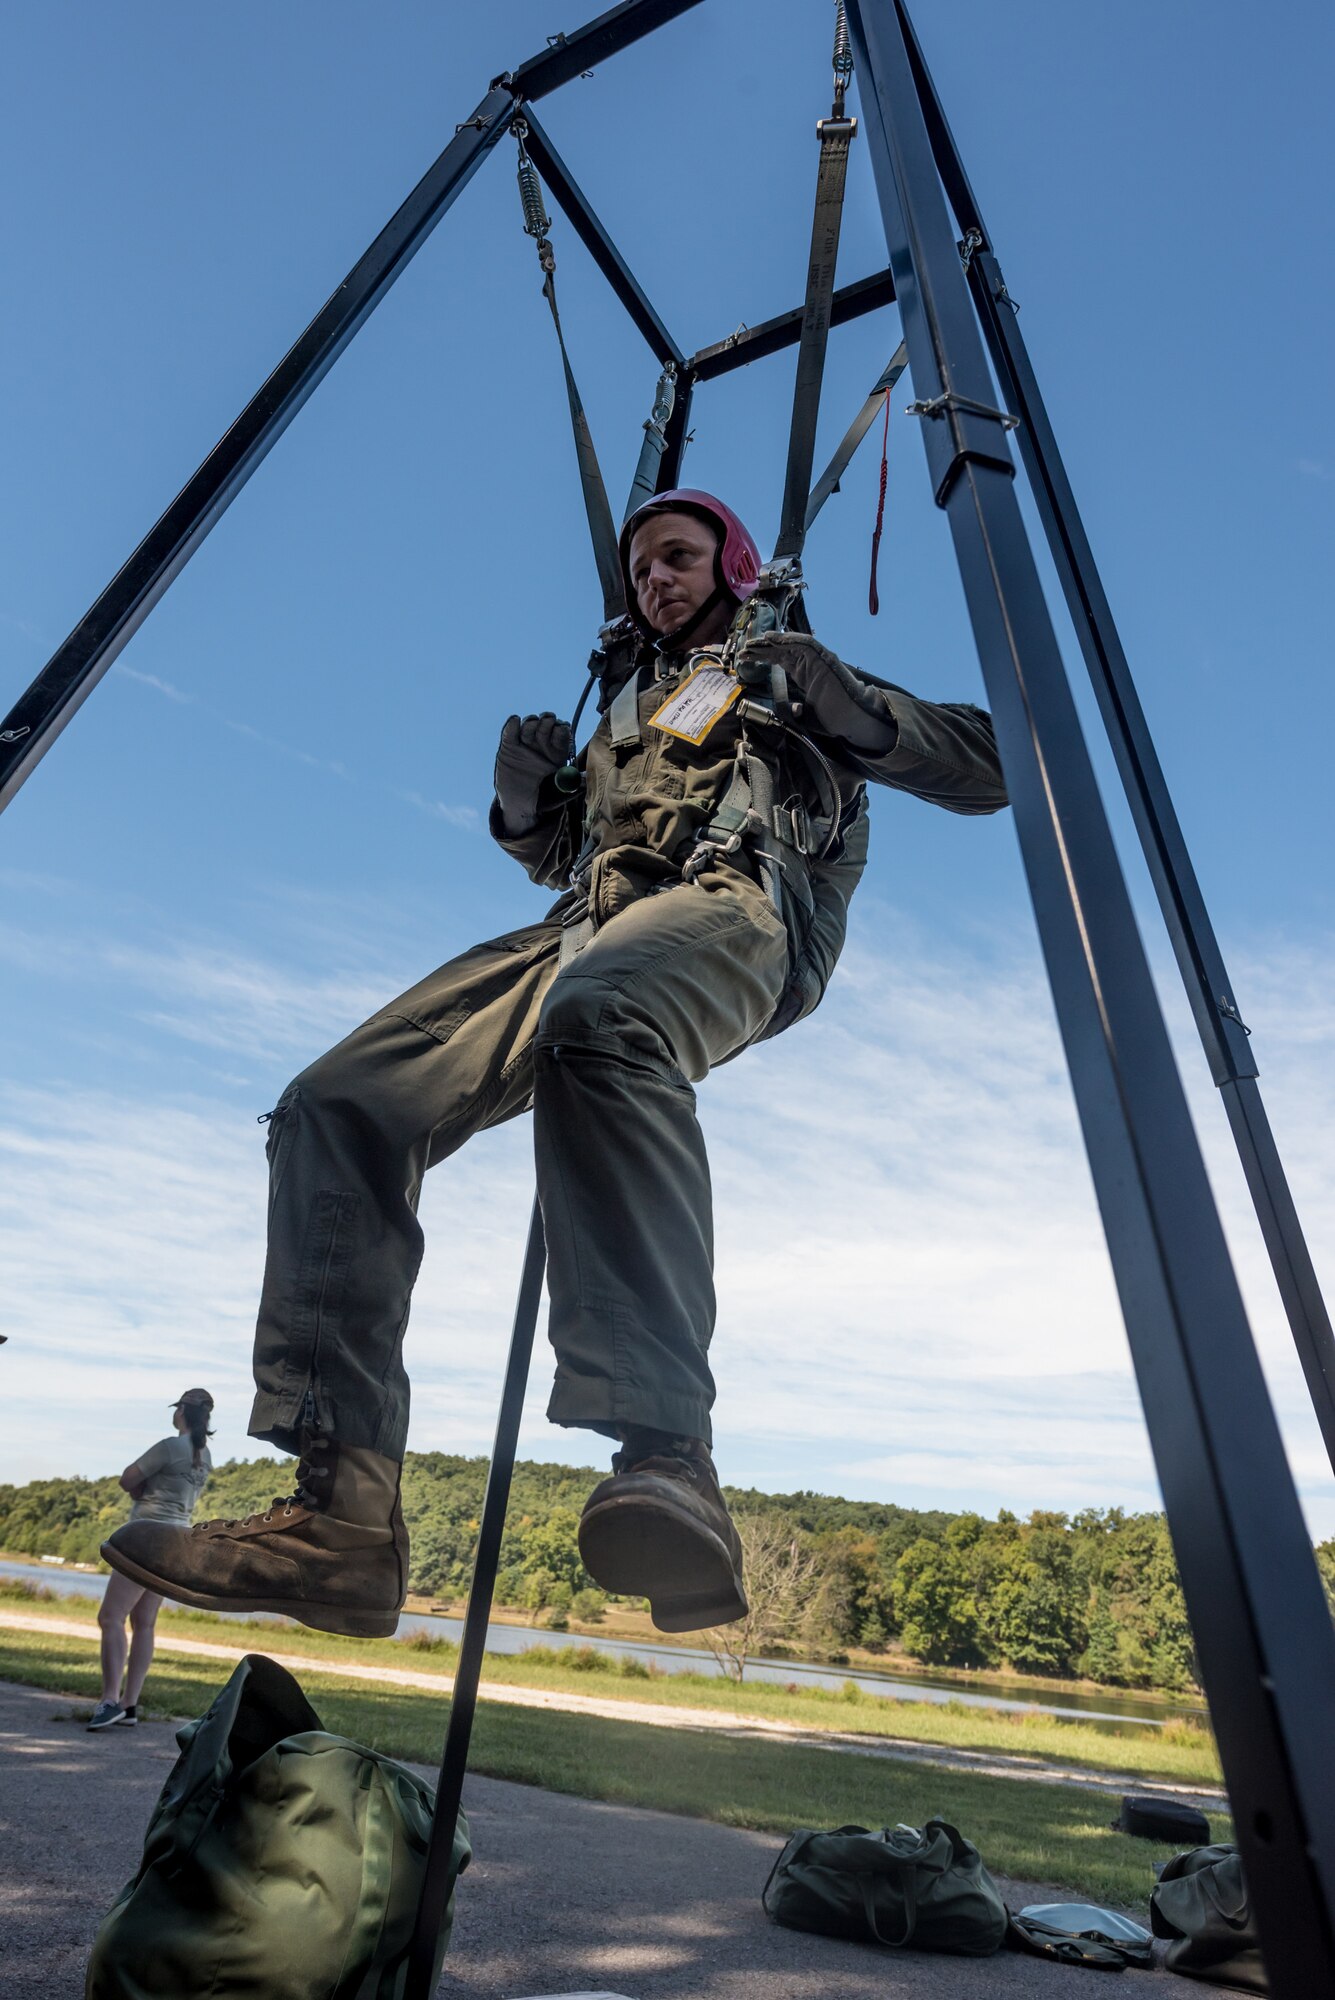 Tech. Sgt. Chris Johnson, a flight engineer for the Kentucky Air National Guard’s 165th Airlift Squadron, lowers himself from a training apparatus during survival training at Camp Crooked Creek in Shepherdsville, Ky., Sept. 14, 2019. The exercise is designed to train aircrew members on proper procedures should they become caught in a tree while parachuting to the ground. (U.S. Air National Guard photo by Staff Sgt. Joshua Horton)